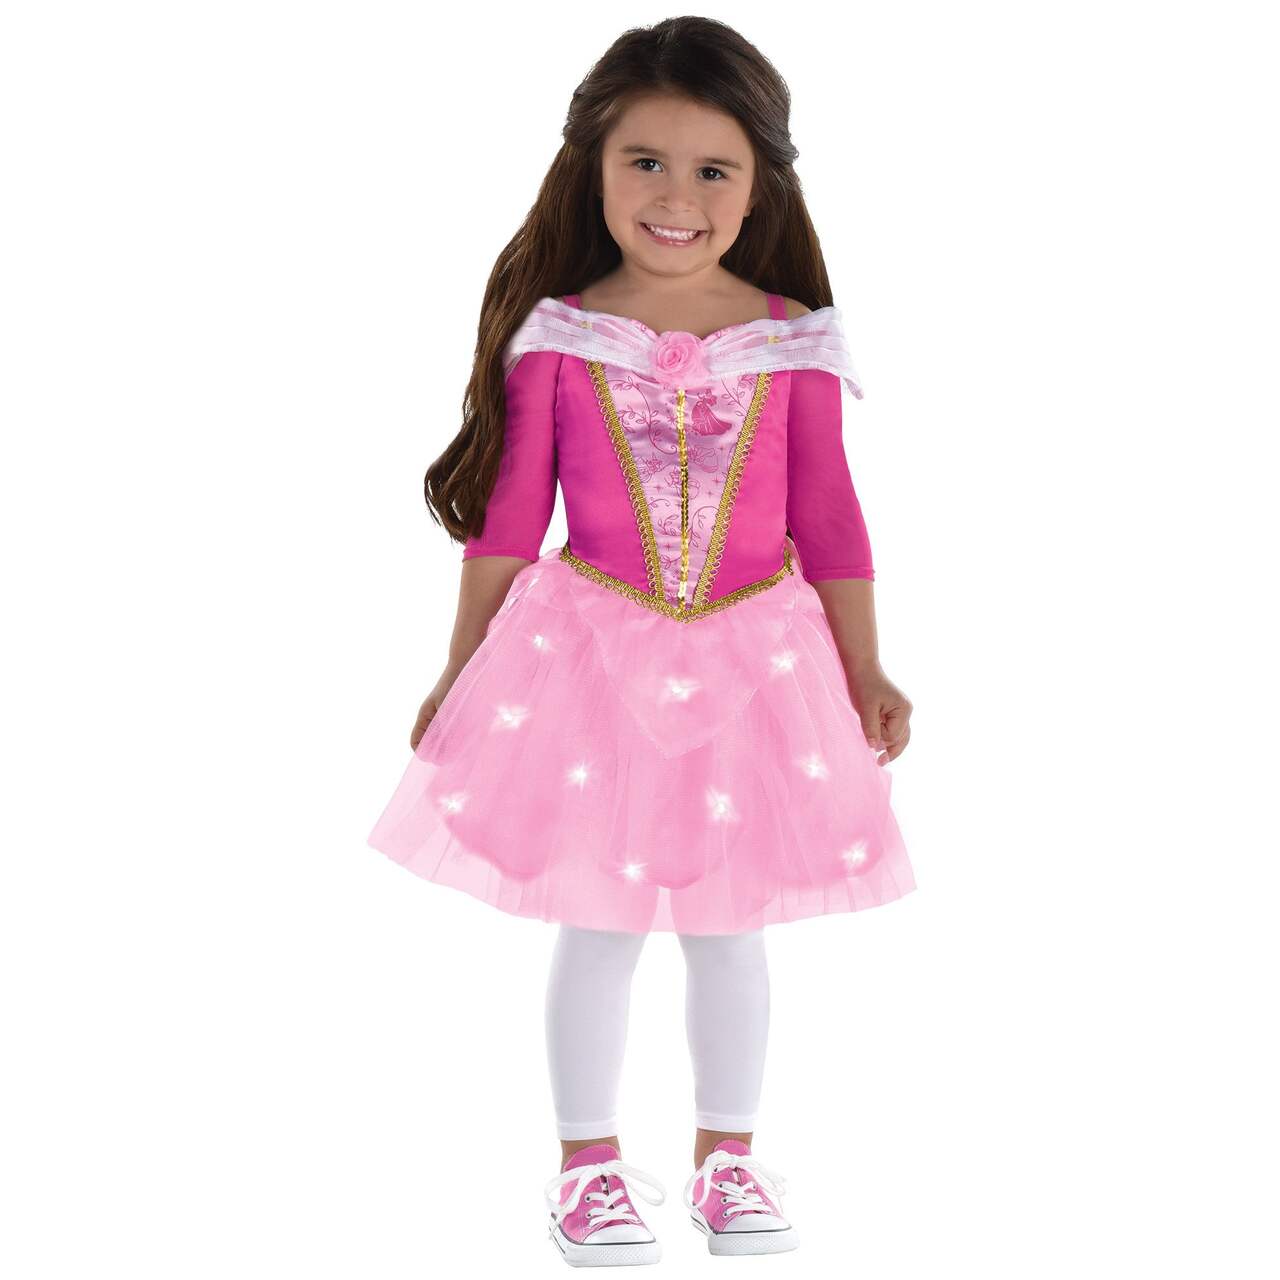 https://media-www.canadiantire.ca/product/seasonal-gardening/party-city-seasonal/party-city-halloween-and-fall-decor/8550806/sleeping-beauty-light-up-girl-costume-toddler-3-4-73362e49-7b3c-4f14-903d-8c5c16ab1173-jpgrendition.jpg?imdensity=1&imwidth=640&impolicy=mZoom